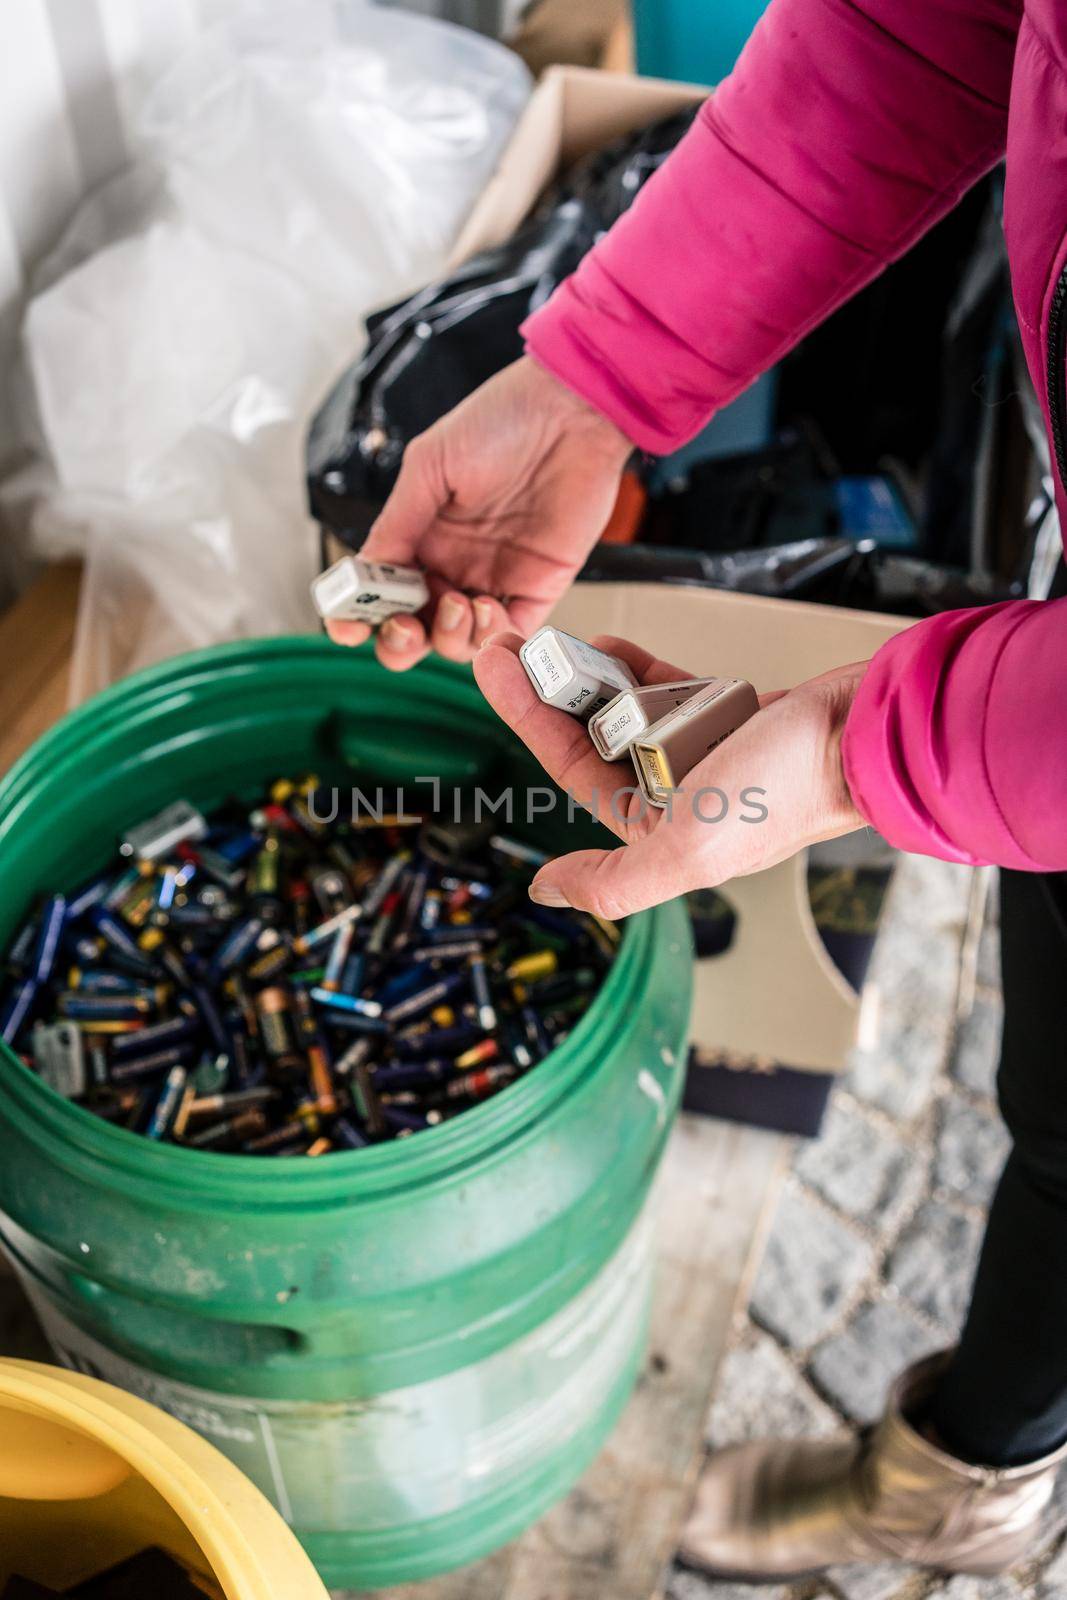 Batteries being disposed of in recycling center, hands of woman